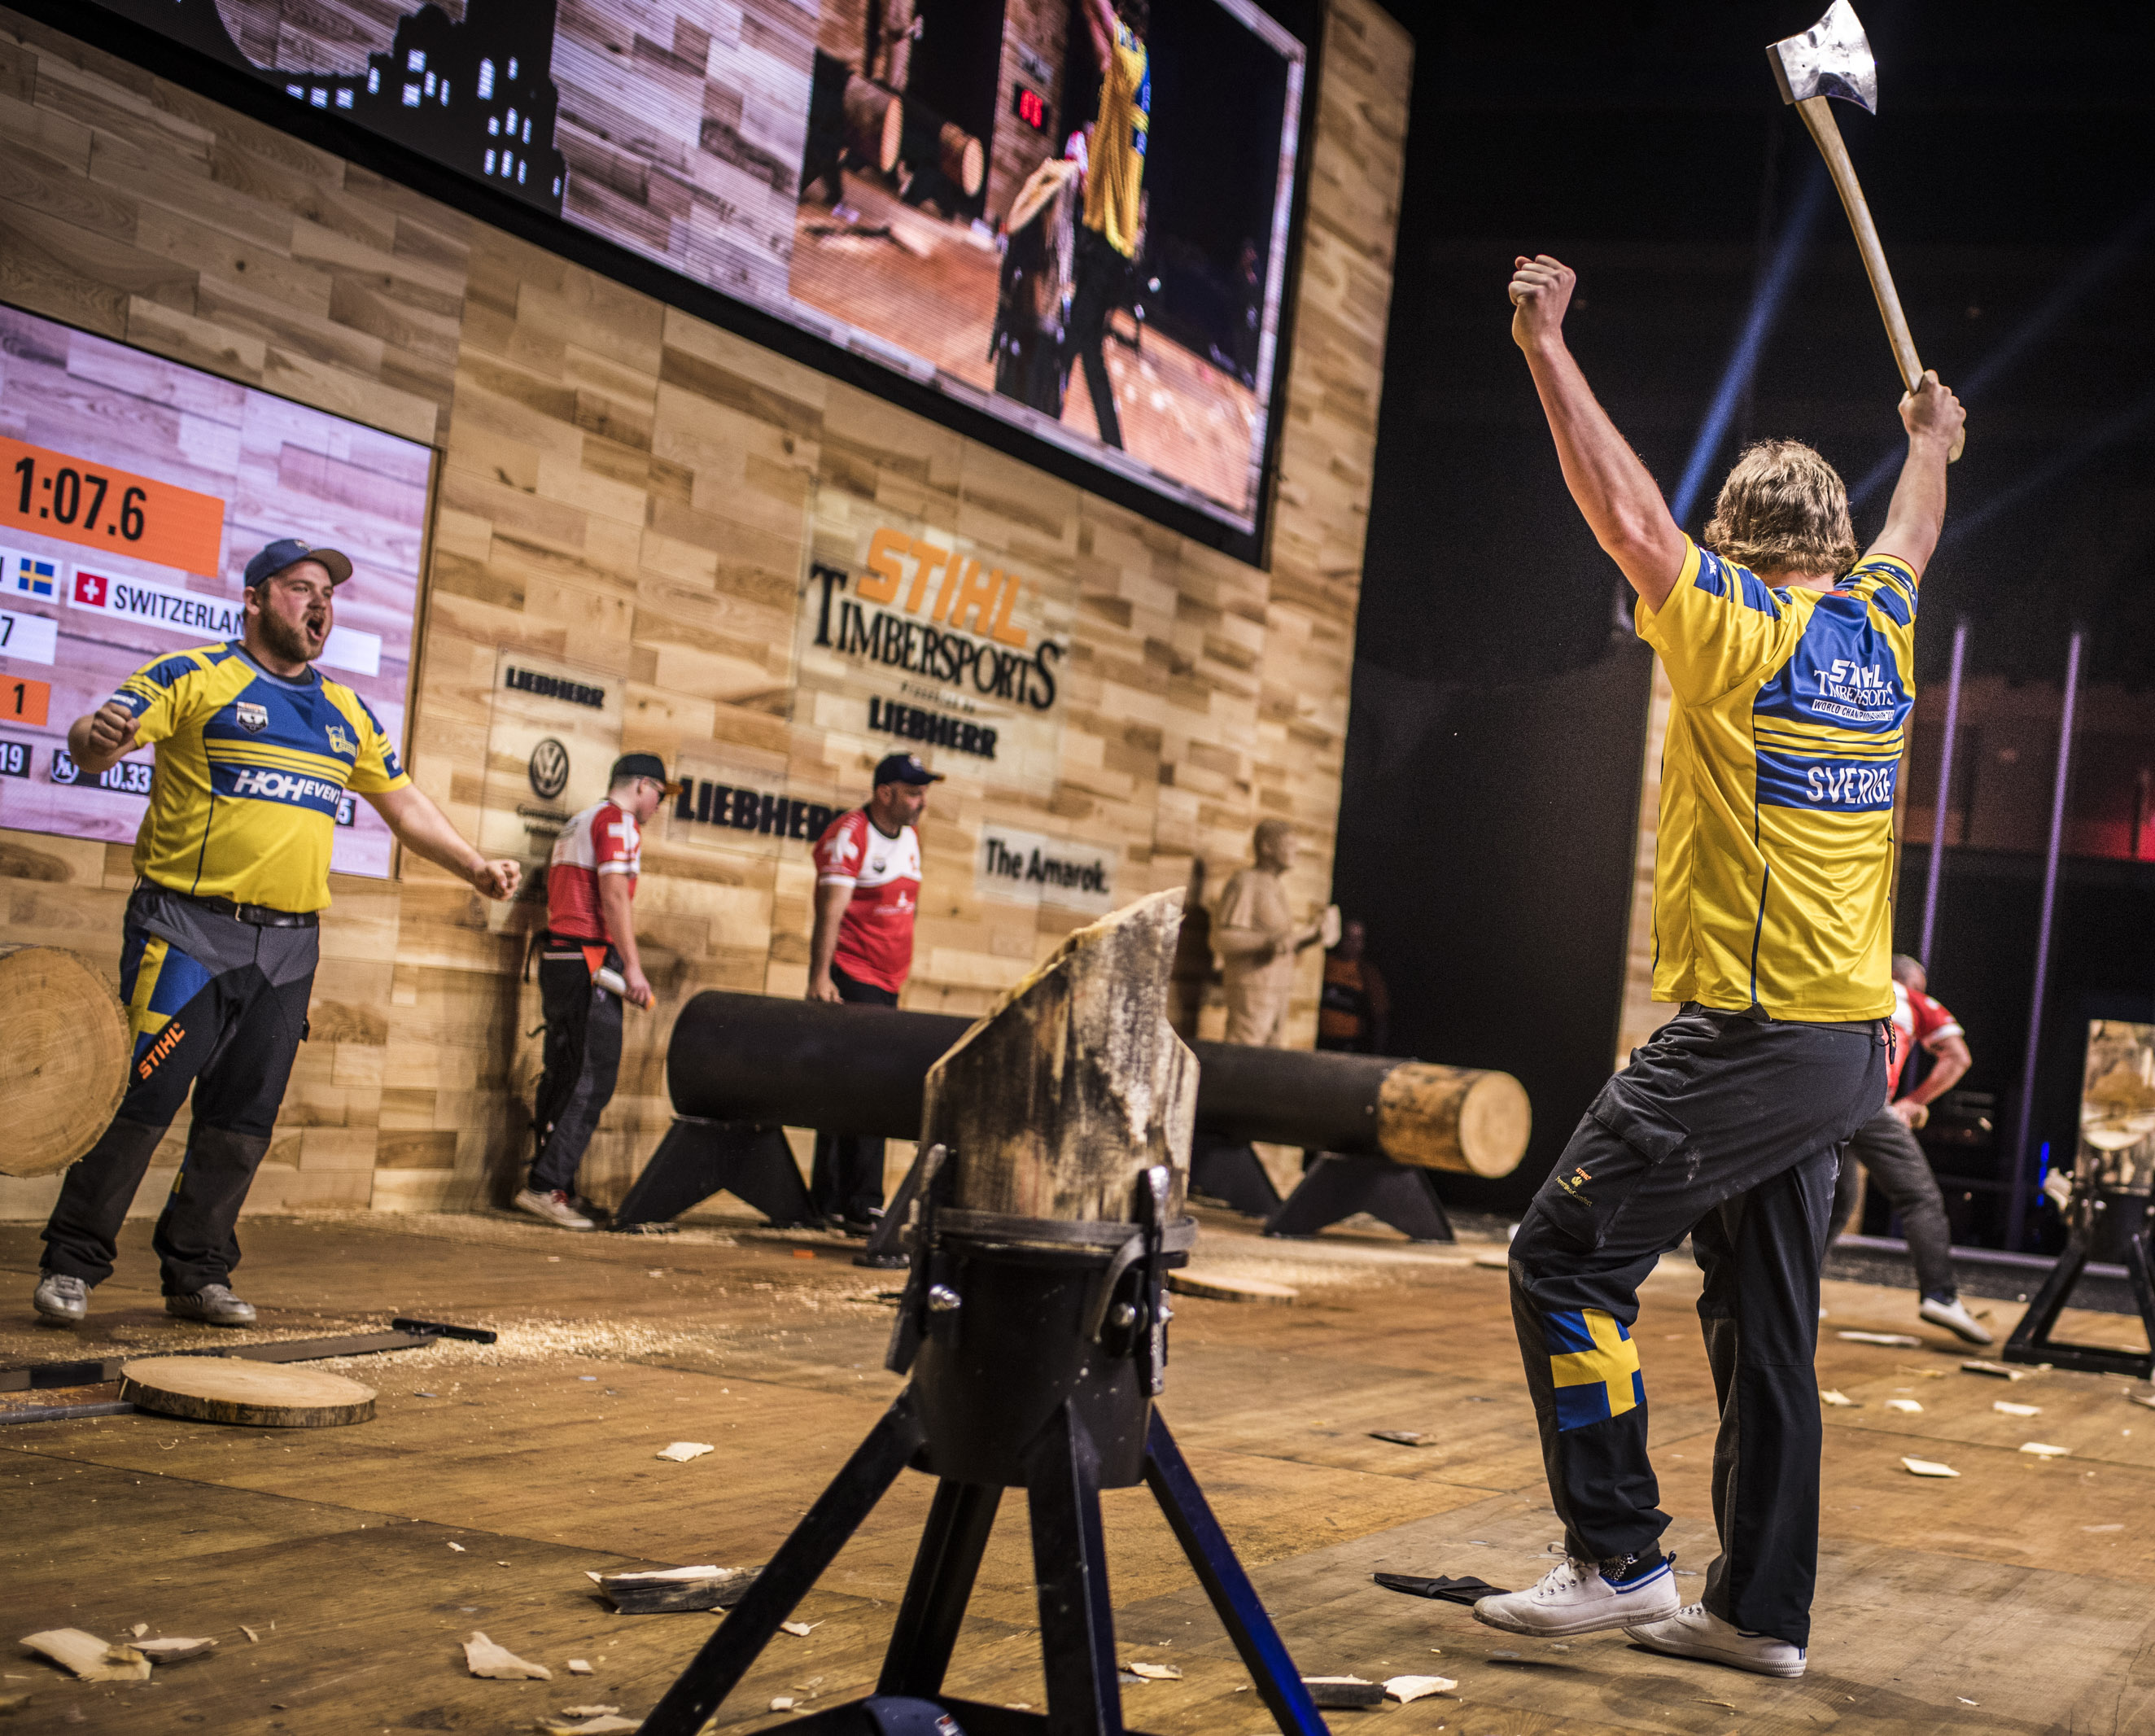 Calle Svadling and Pontus Skye cheer for victory in the eighth final against Switzerland. Photo: STIHL Timbersports.